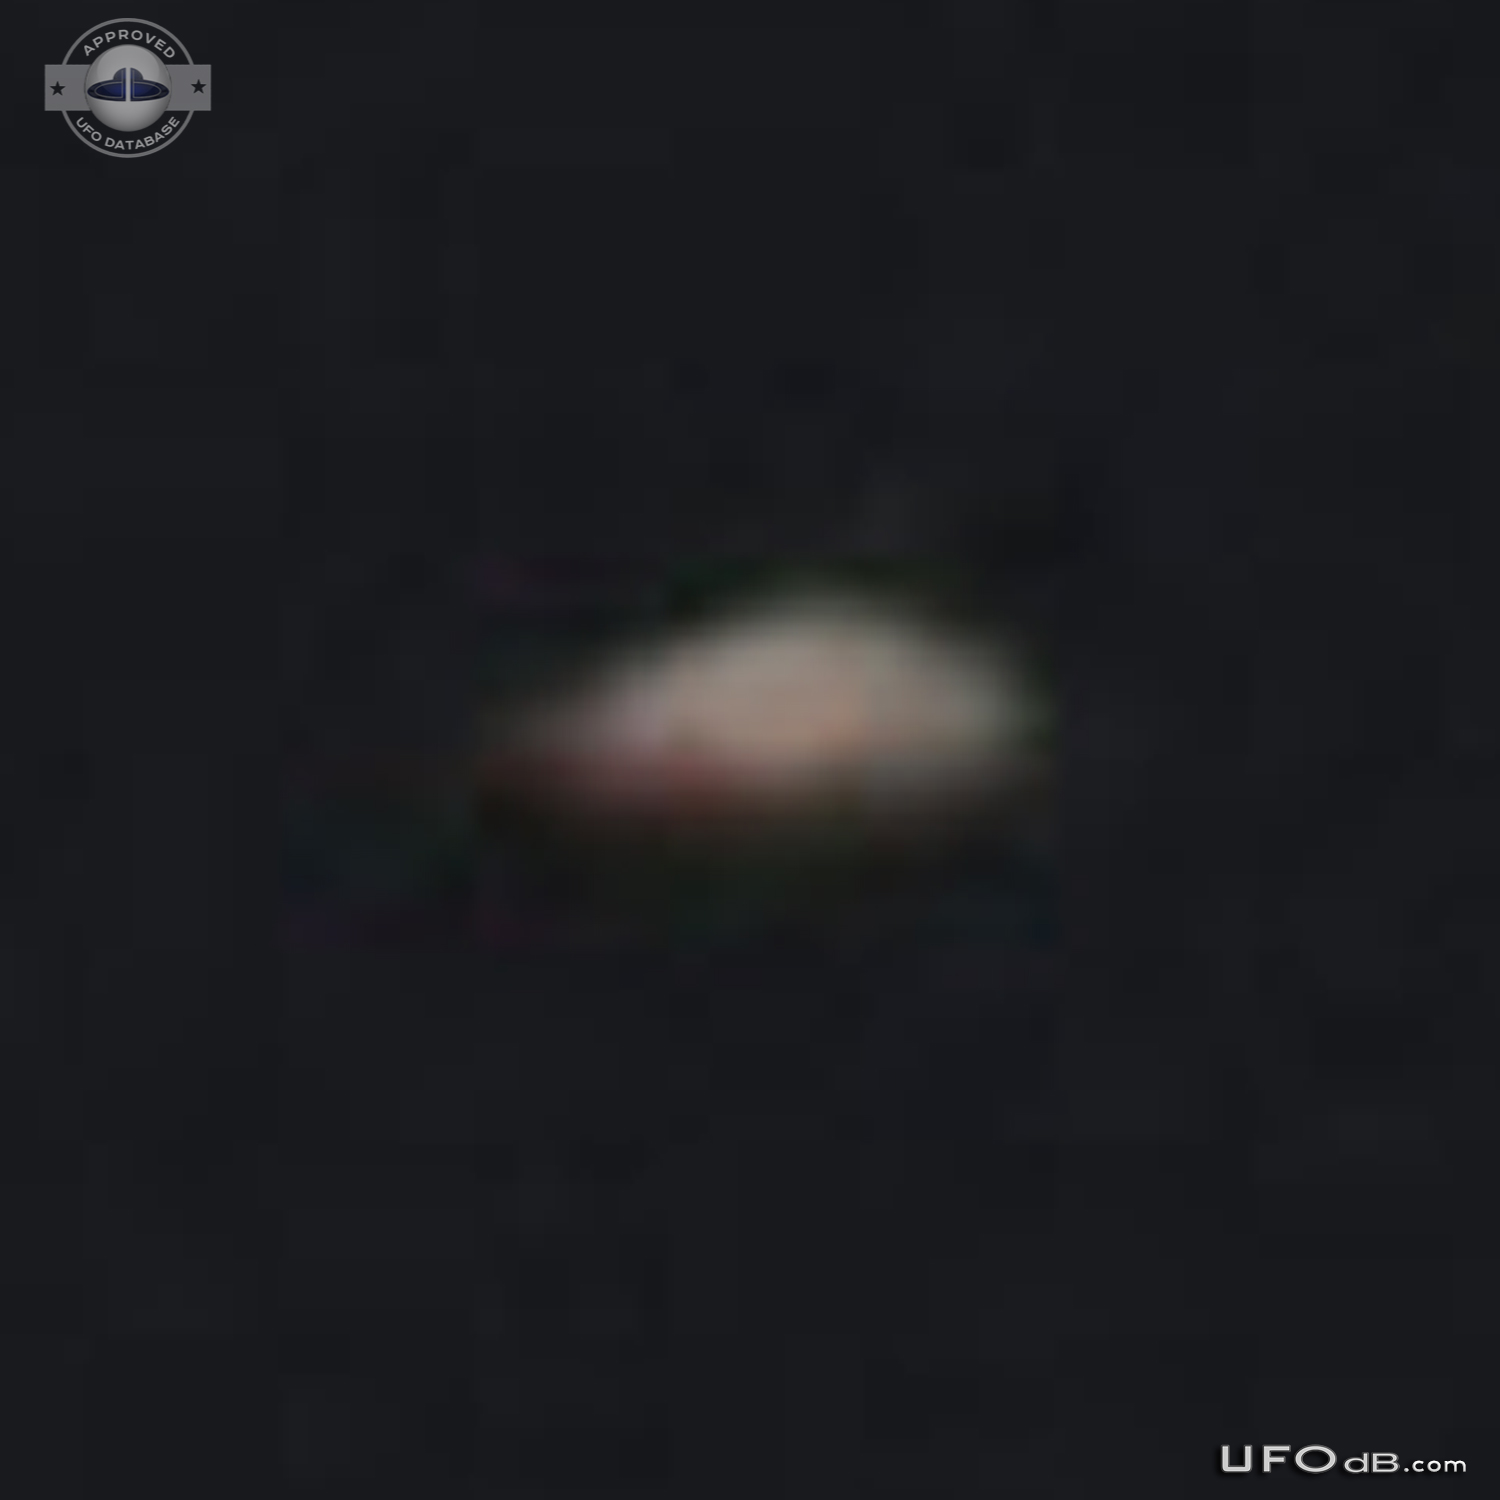 Saucer UFO appear on Soccer Game picture in Liverpool UK 2015 UFO Picture #626-6